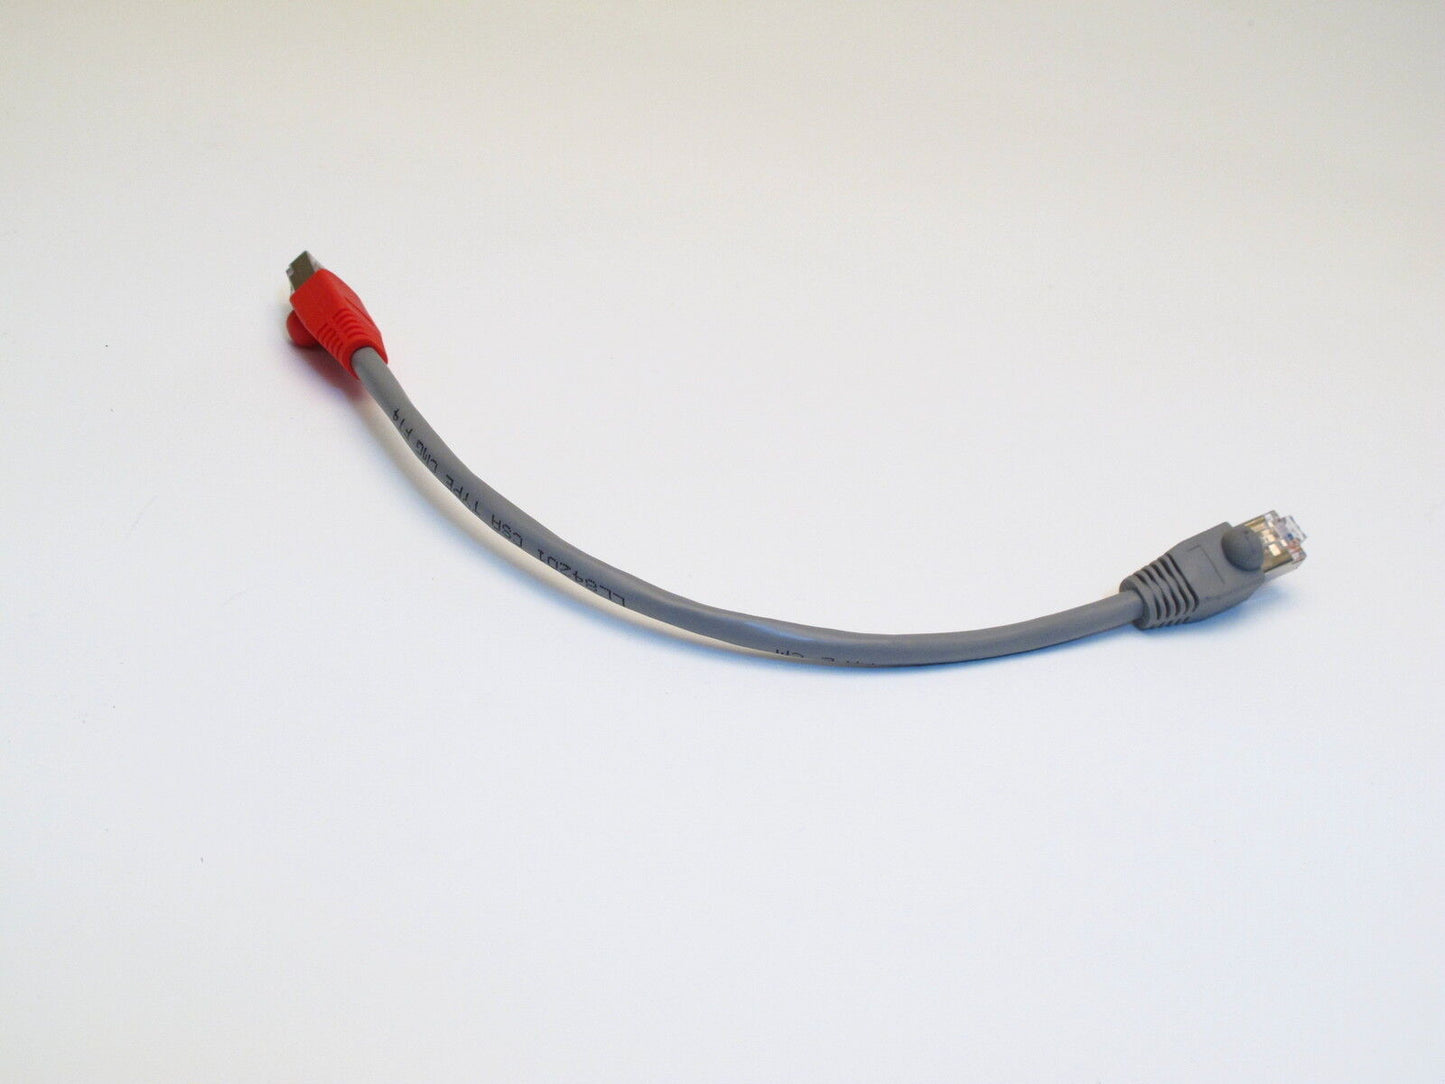 Serial Port Cable for ConnectPRO KVM switches